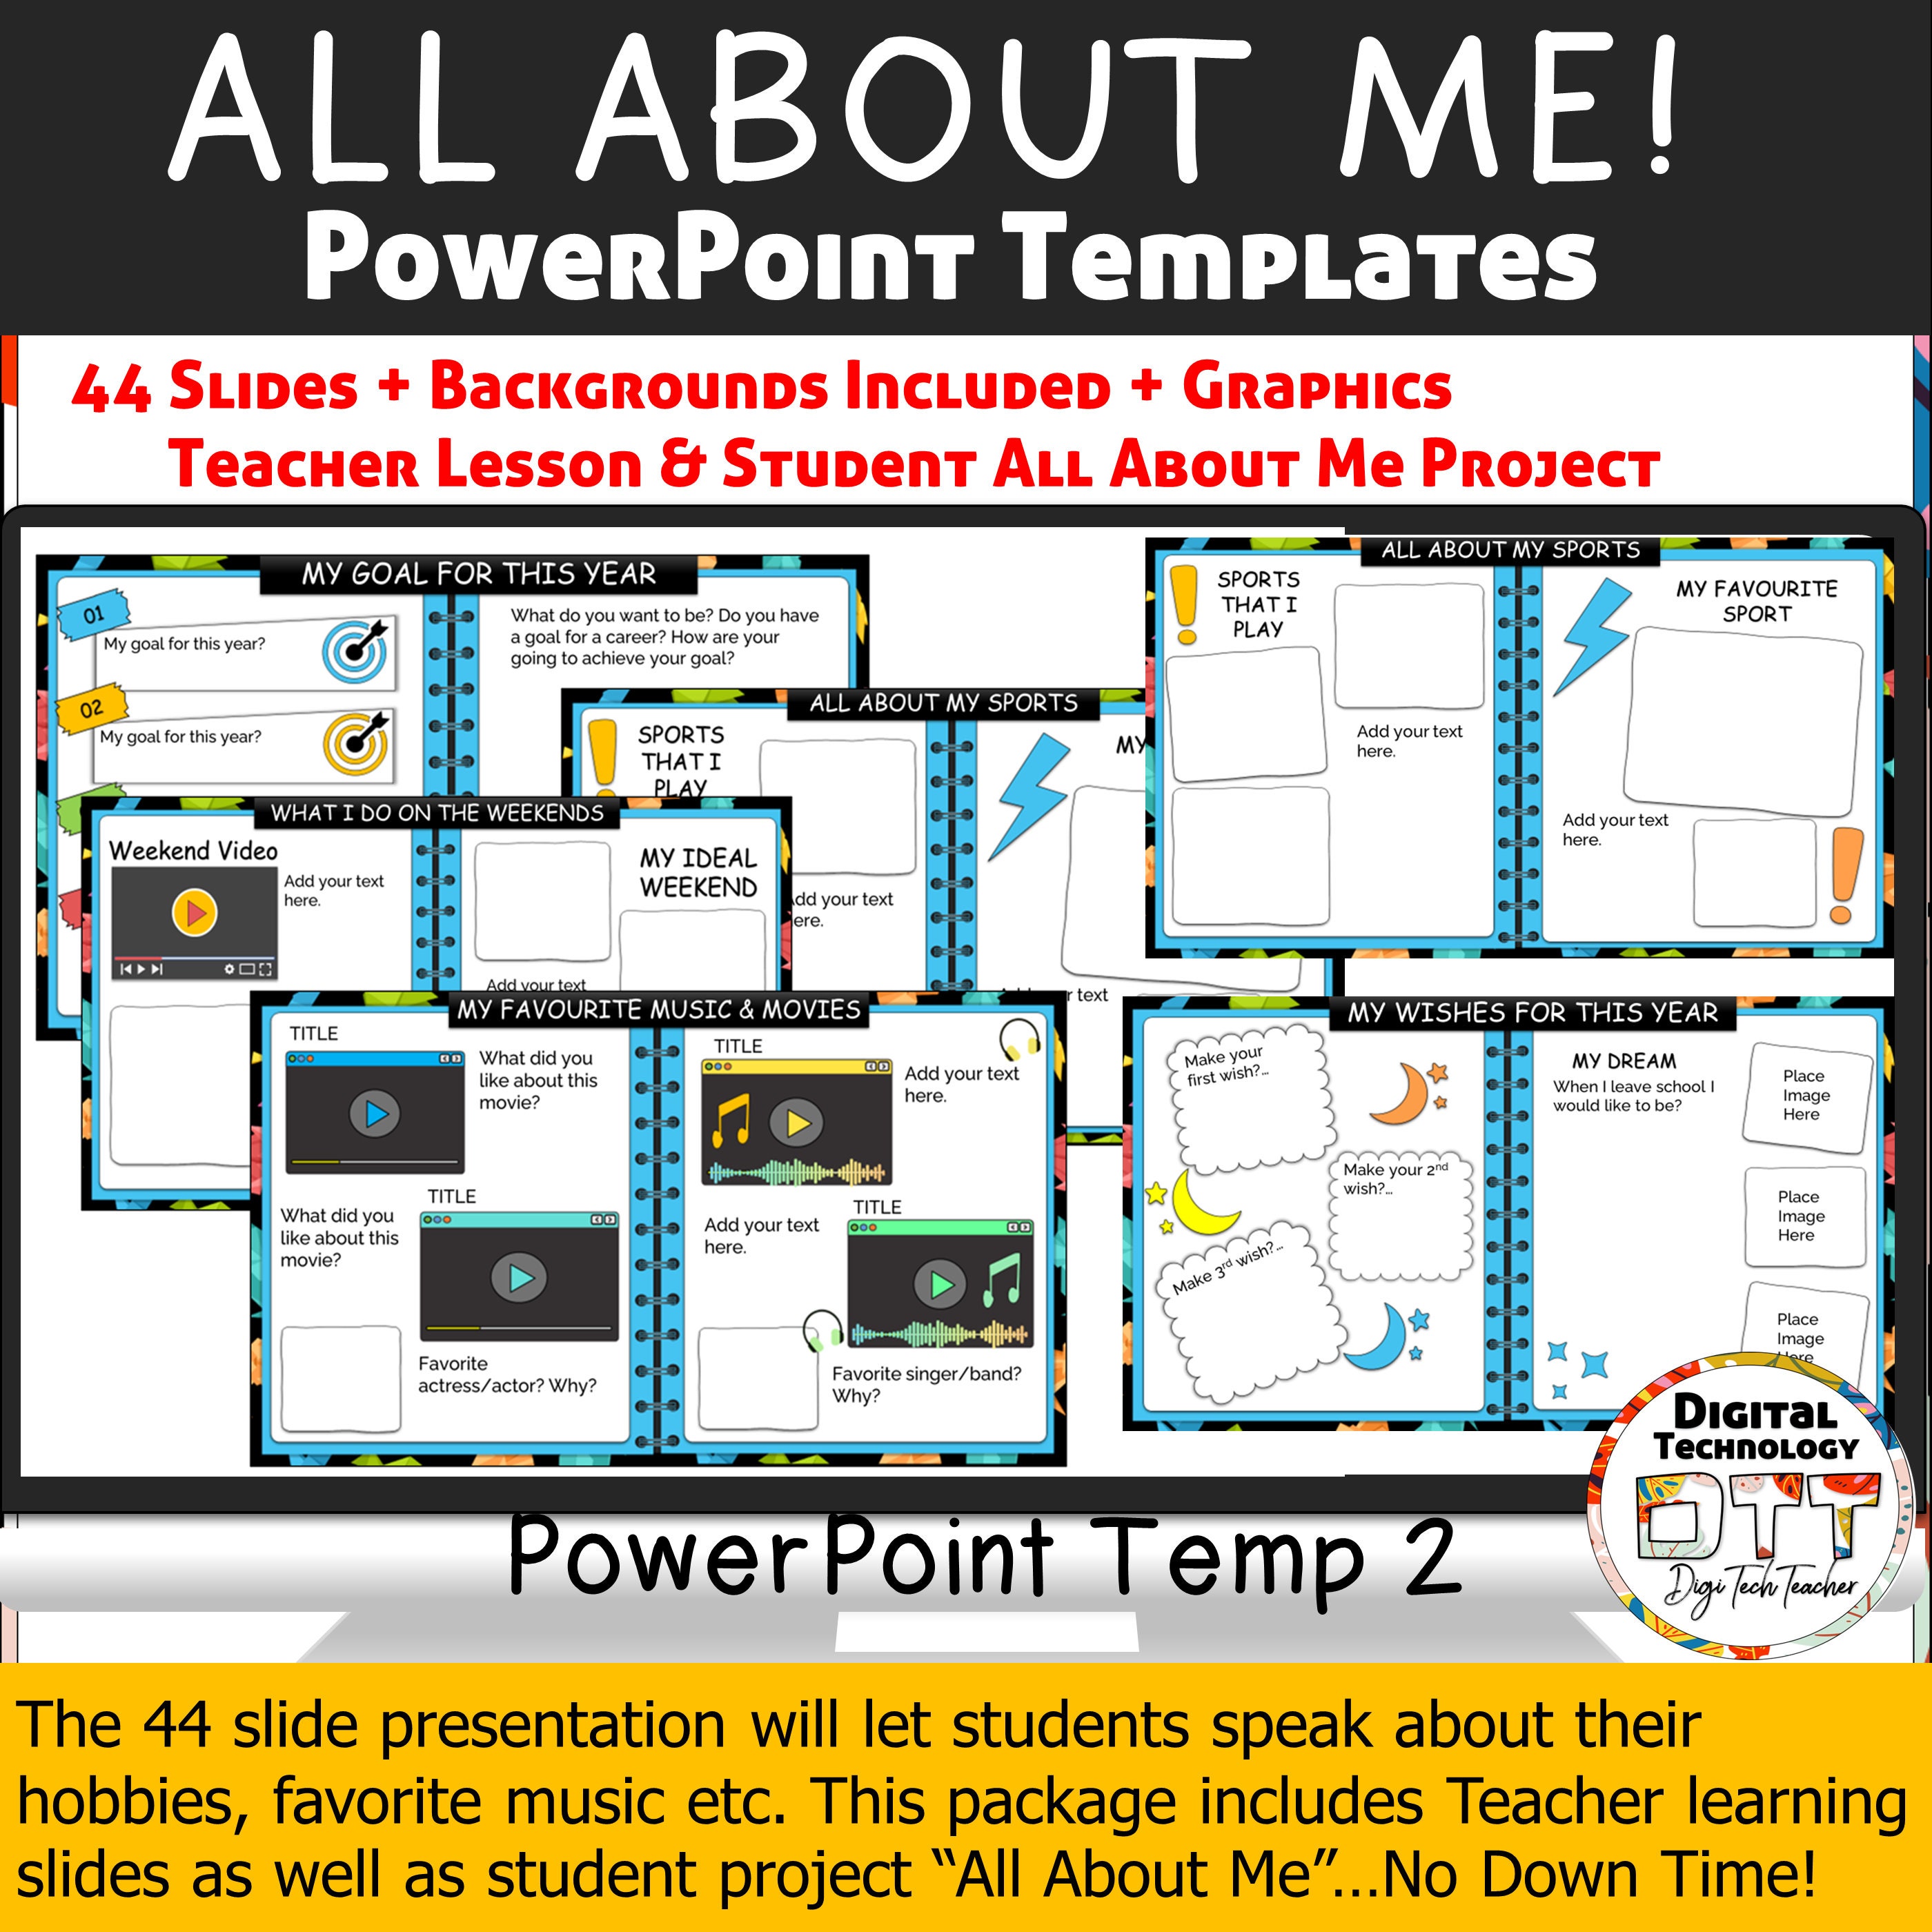 All About Me Powerpoint Template 2, Editable, Back to School, Teacher Get  to Know, All About Me Lesson, School Memories, About Me Journal, 